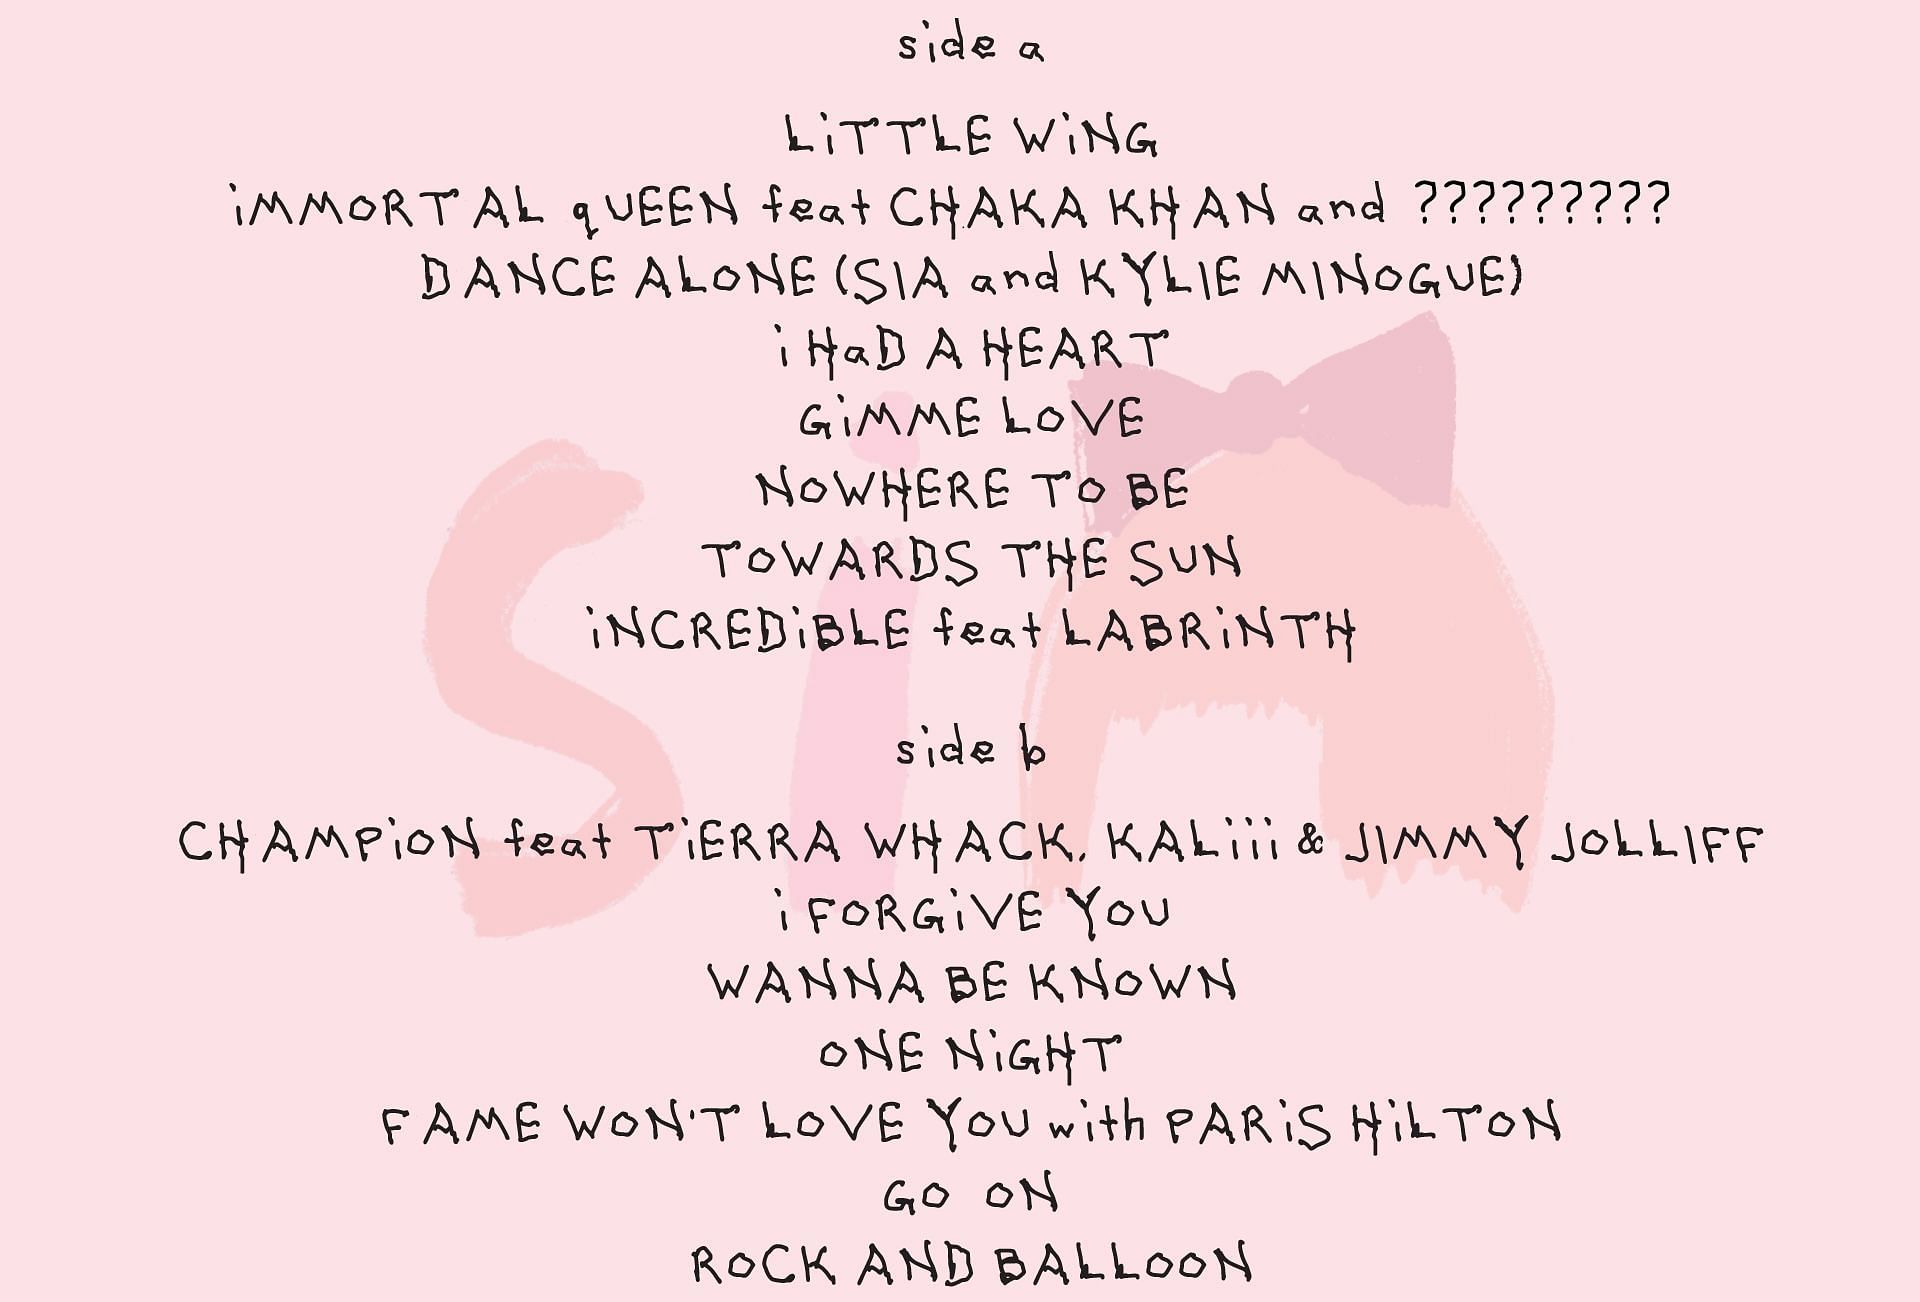 The official tracklist announced for &#039;Reasonable Woman&#039; (Image via X/@Sia)